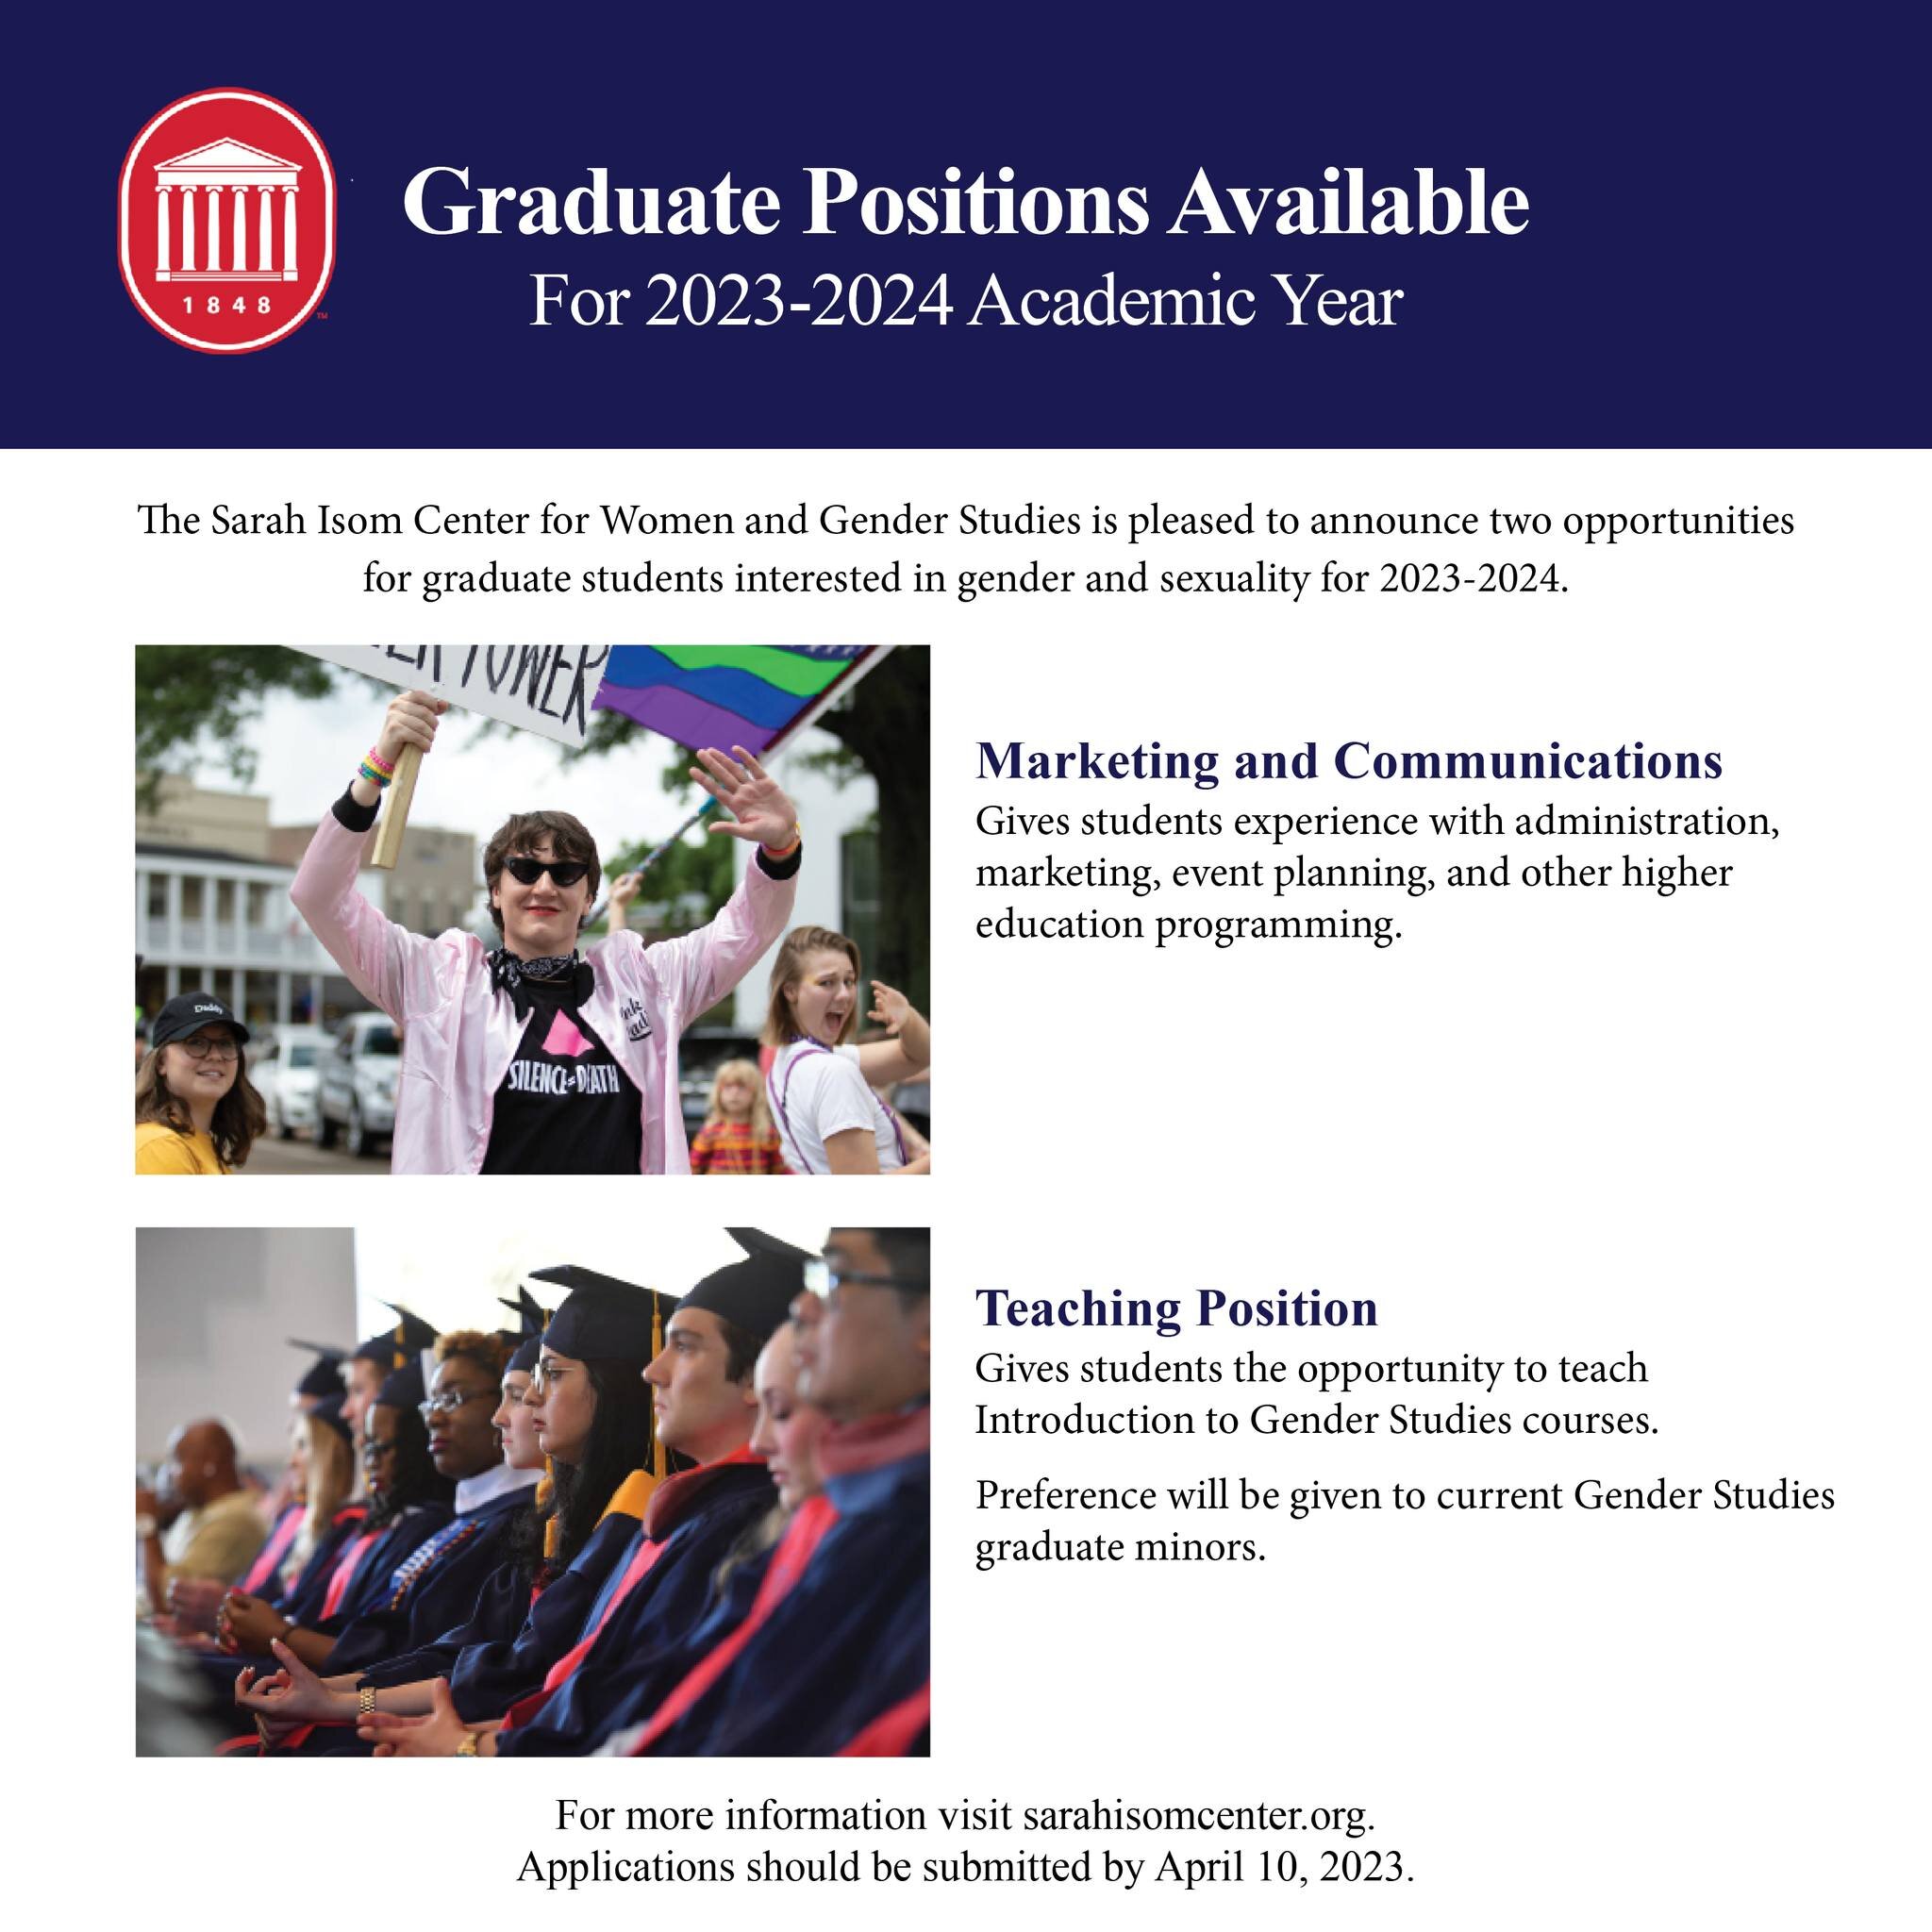 Graduate positions for the 2023-2024 academic year are now available! Visit sarahisomcenter.org for more information.